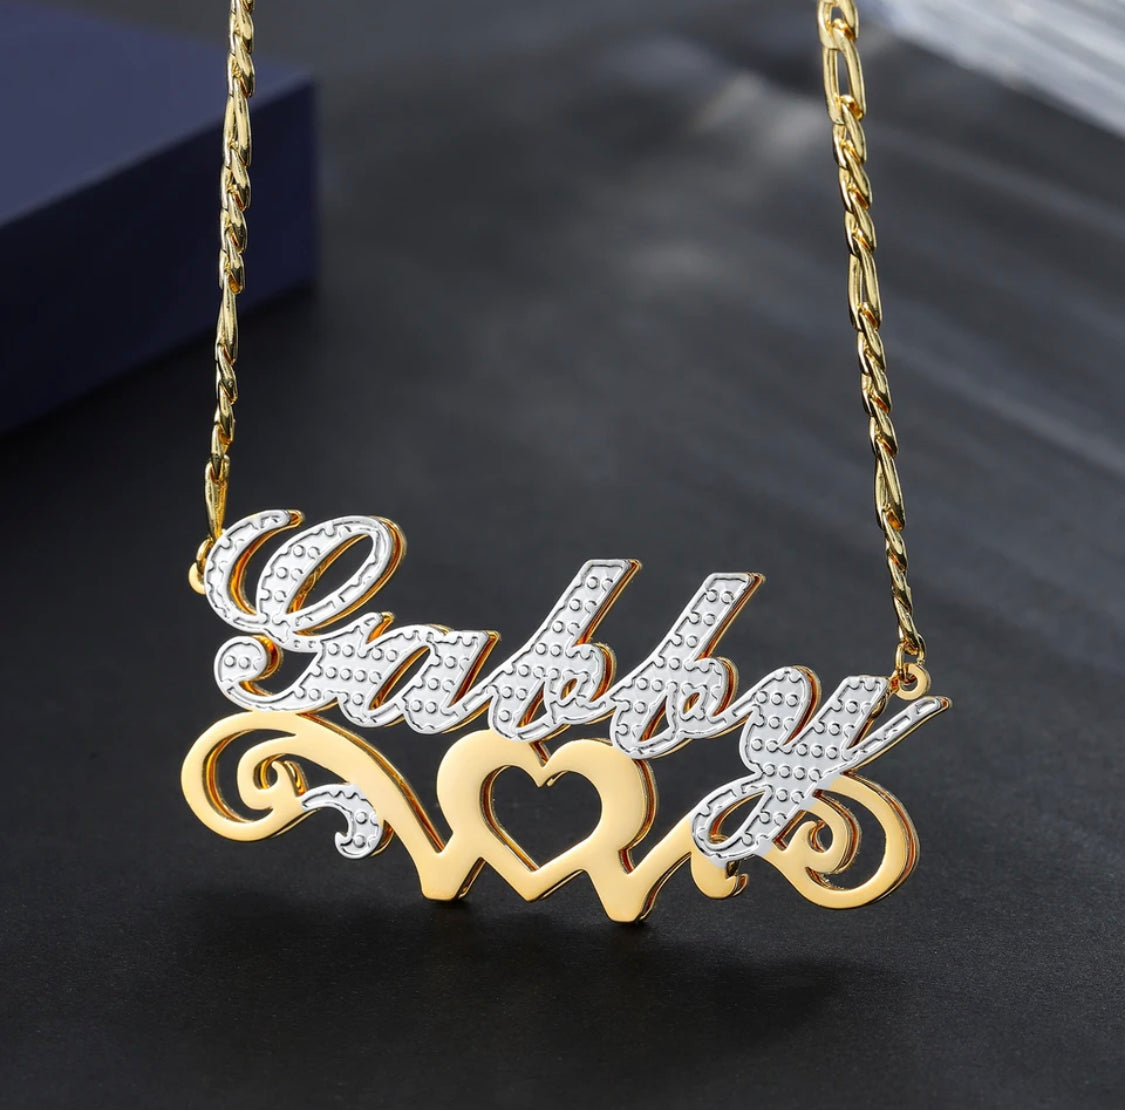 The Gabby Necklace